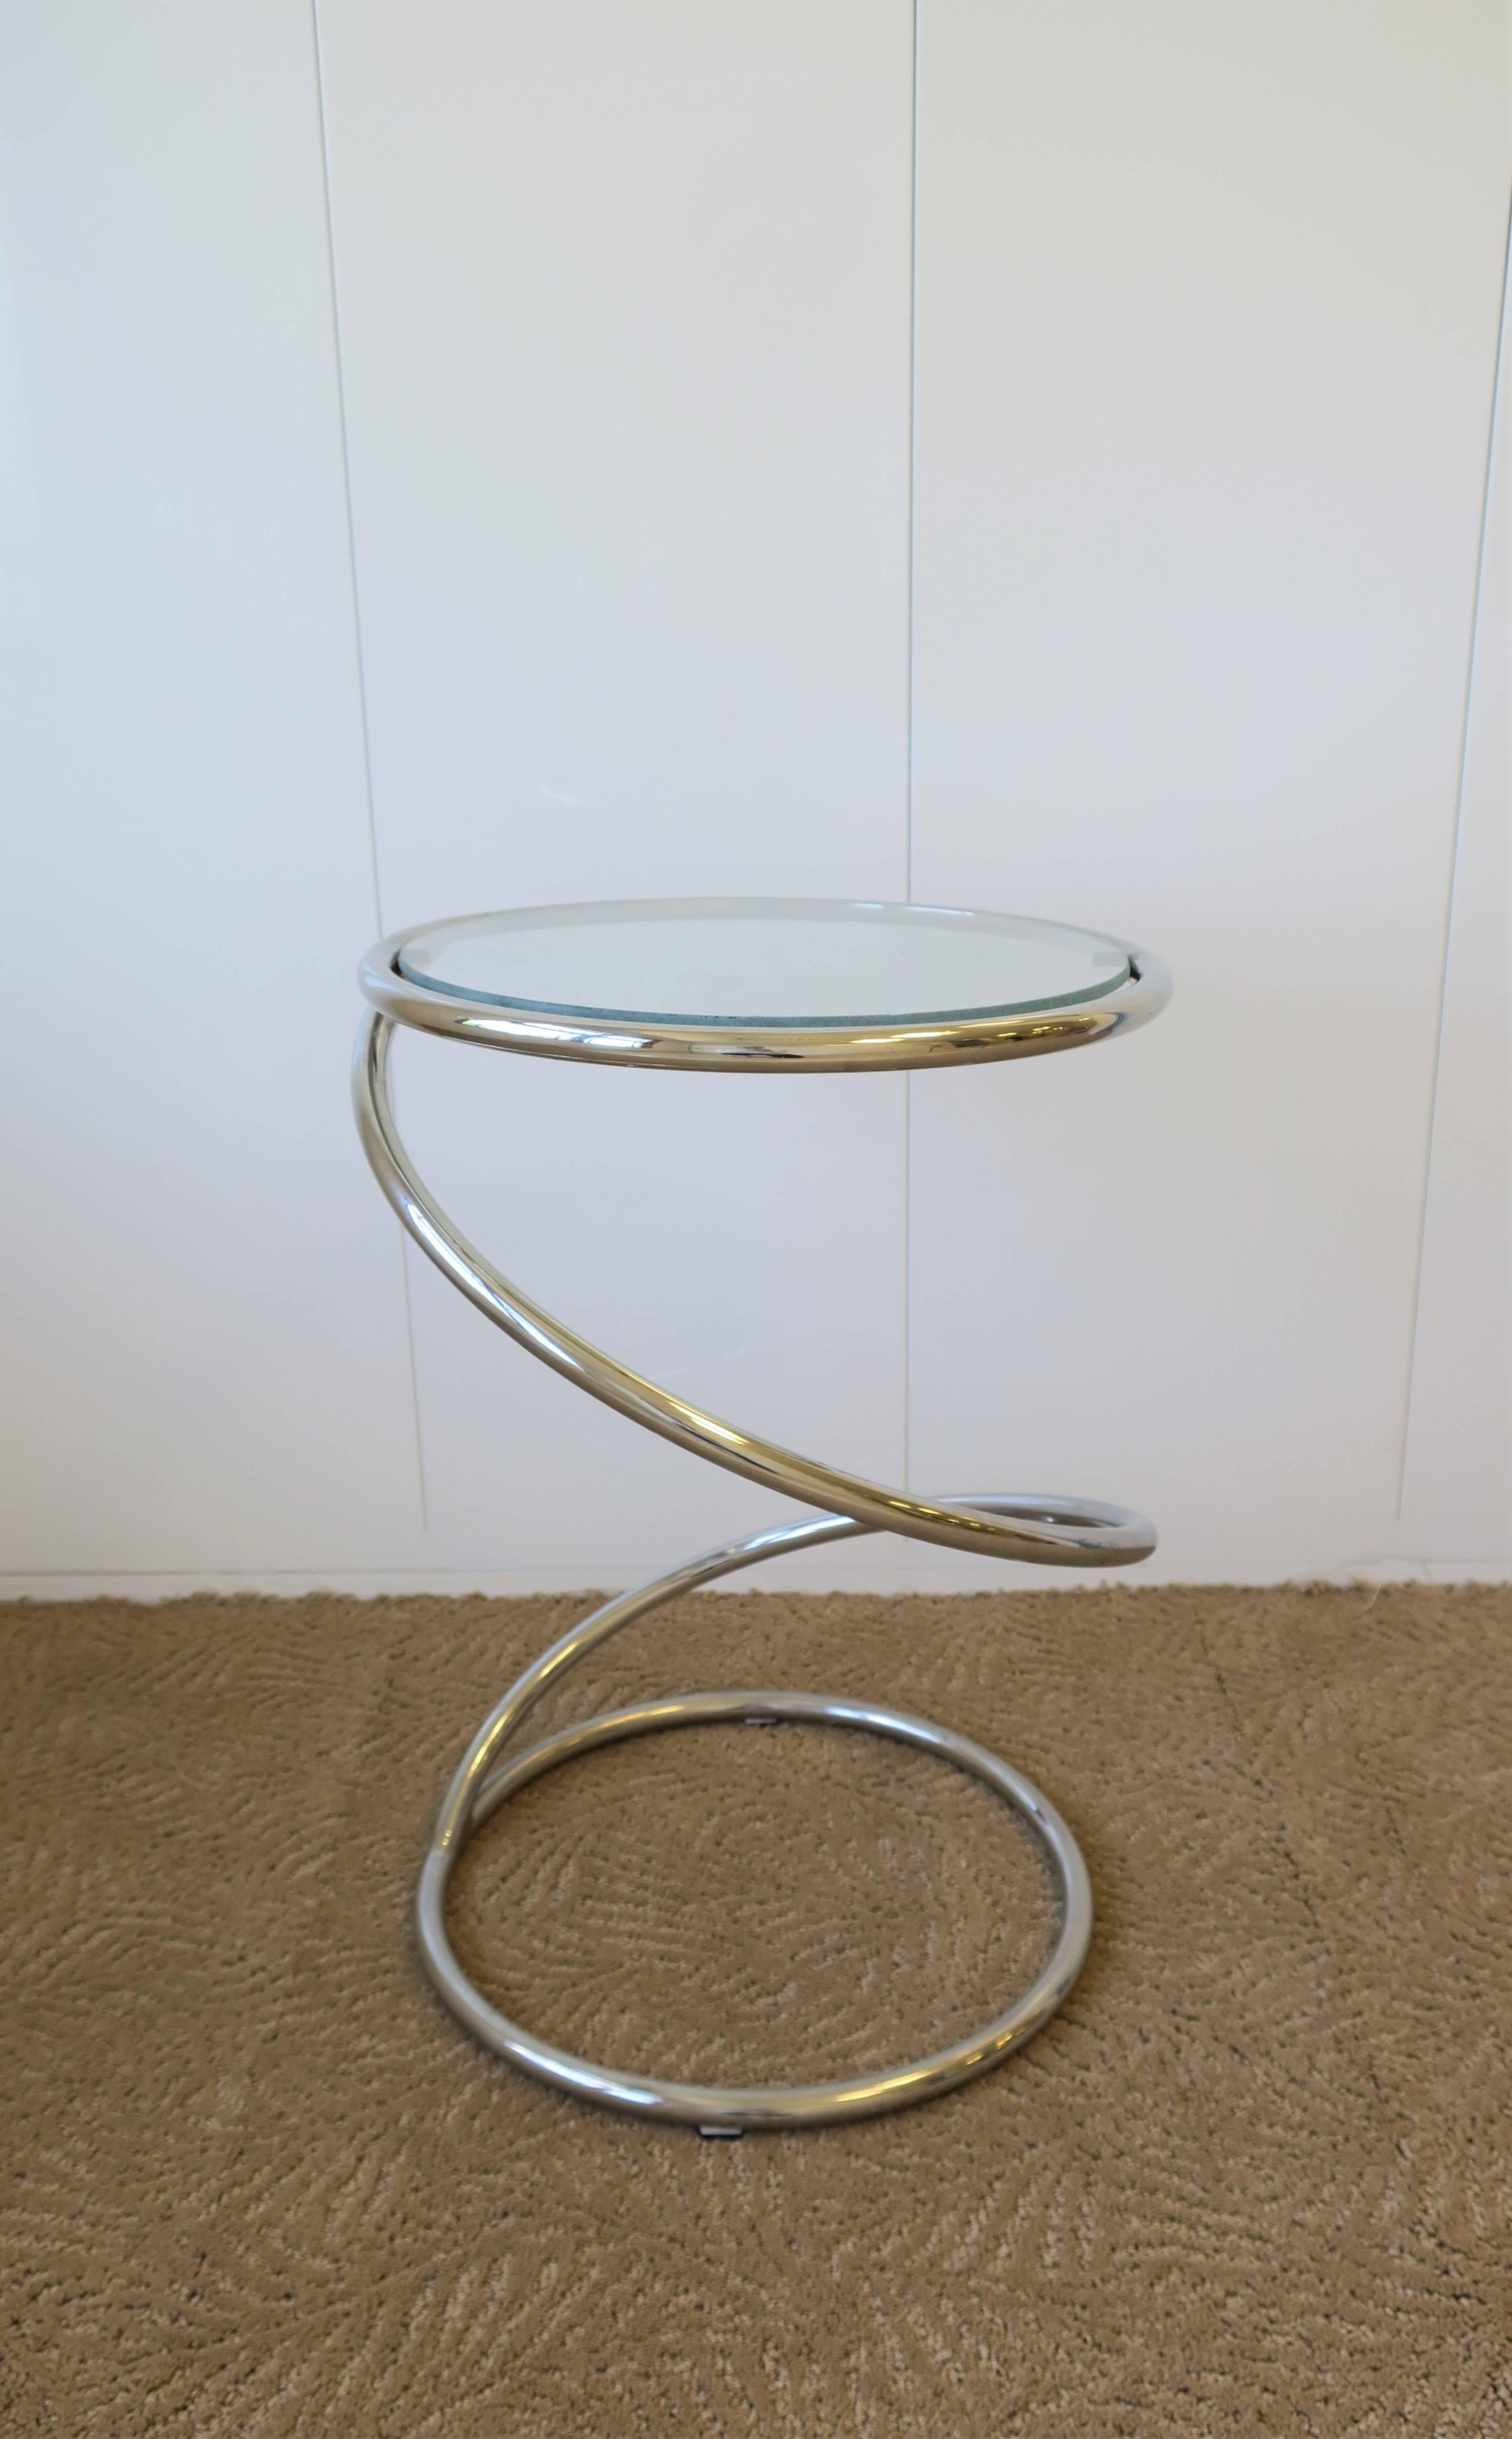 A vintage Modern round chrome and glass twist side table, circa 1970s Modern.  

Table measures: 19.25 in. H x 13.25 in. diameter

